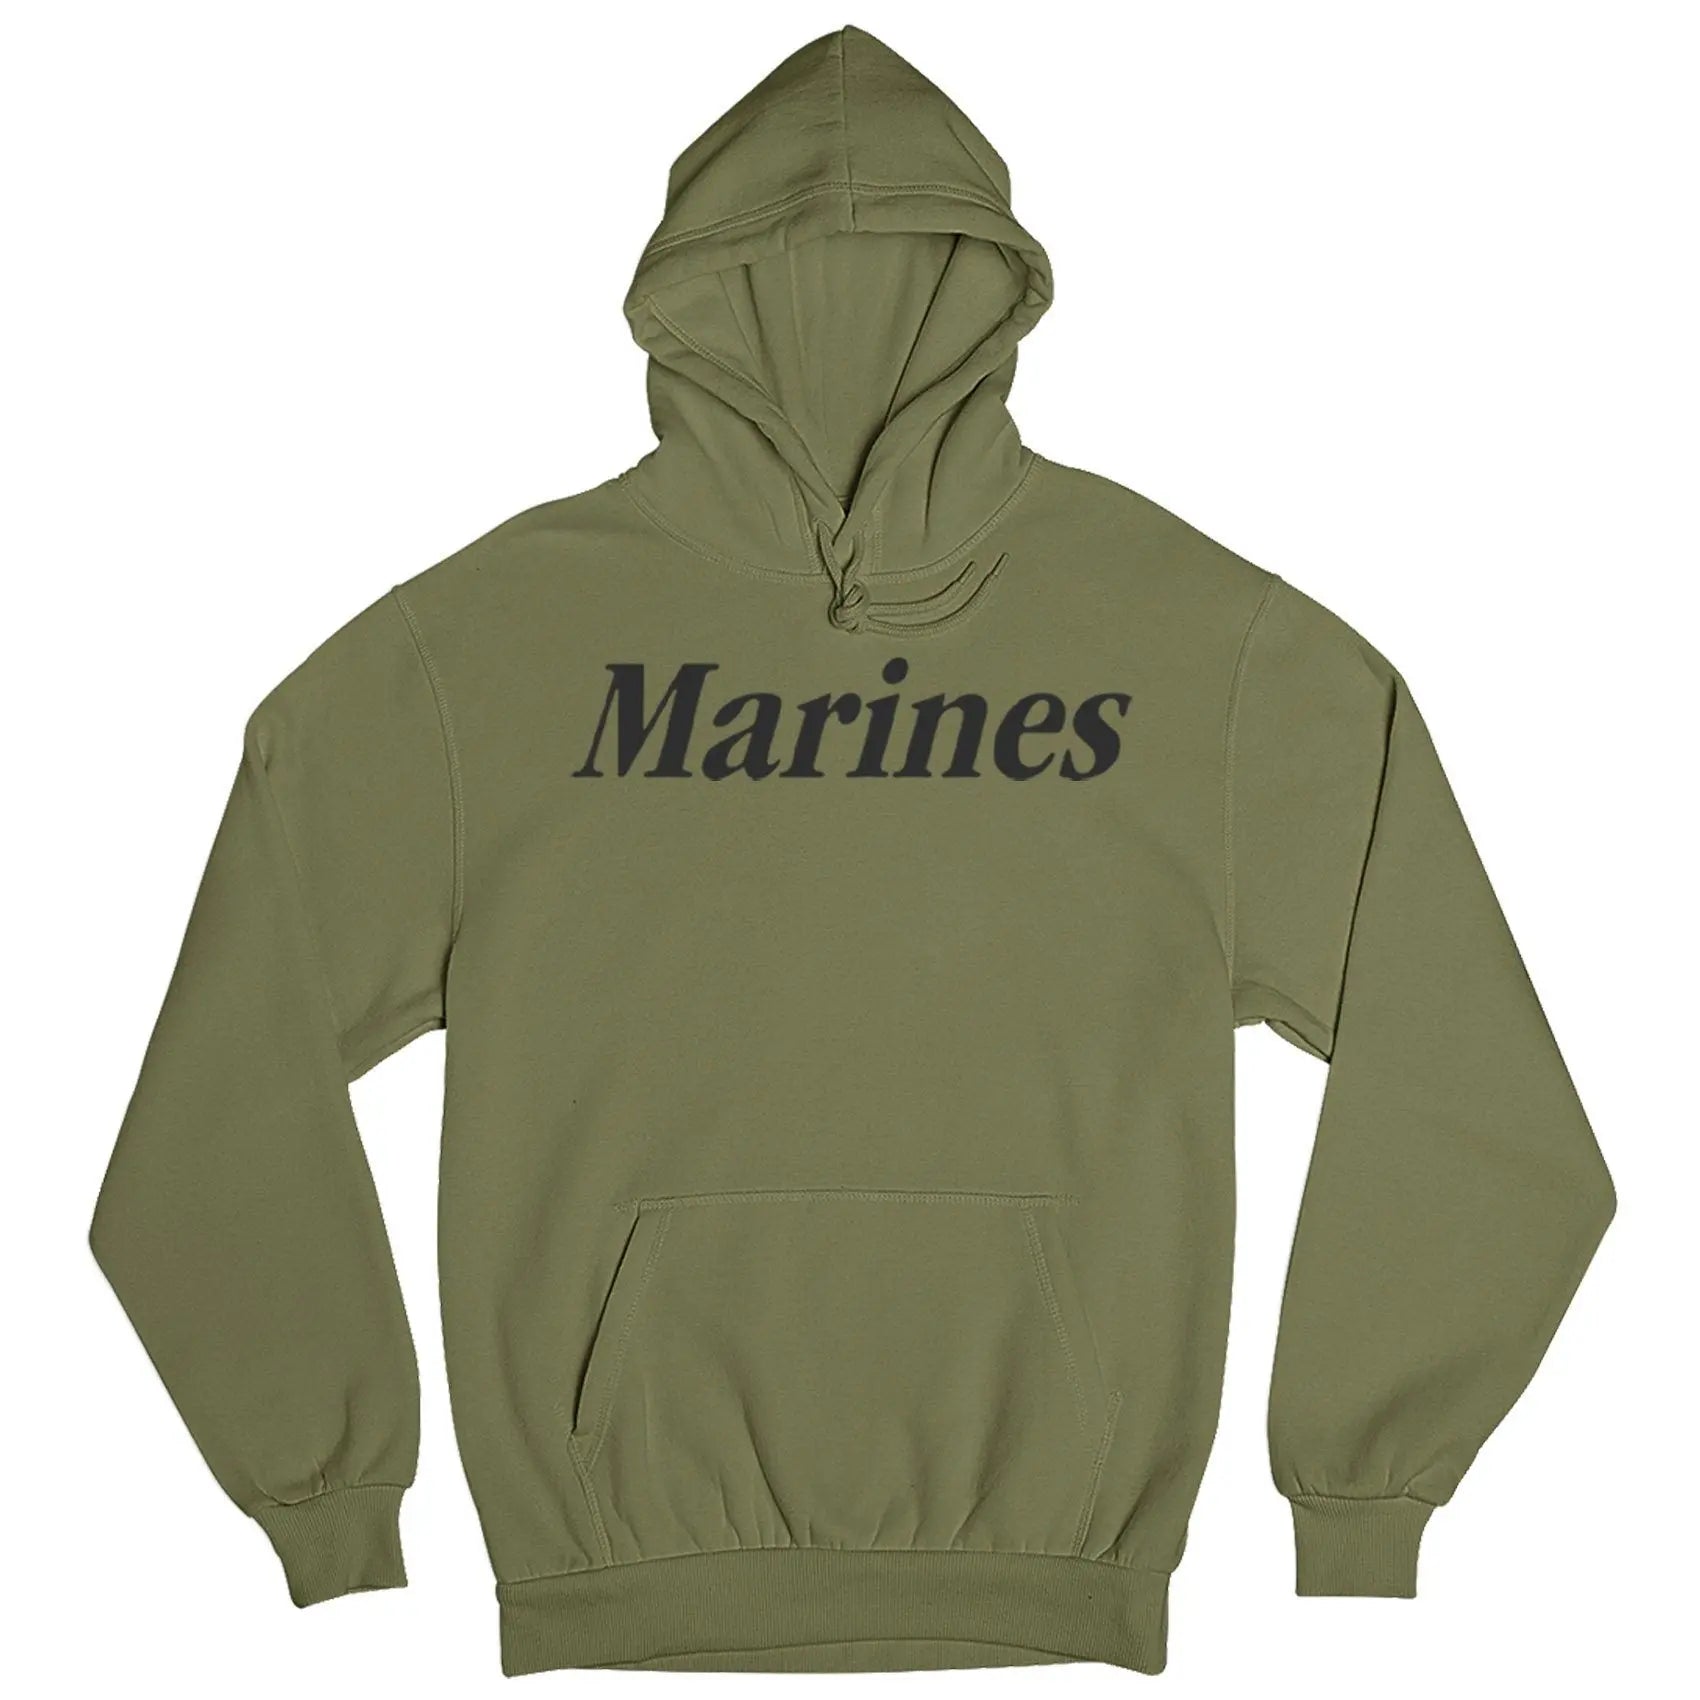 Limited Edition Marines Hoodie (CPT's SPECIAL Extra $8 Discount) - Marine Corps Direct